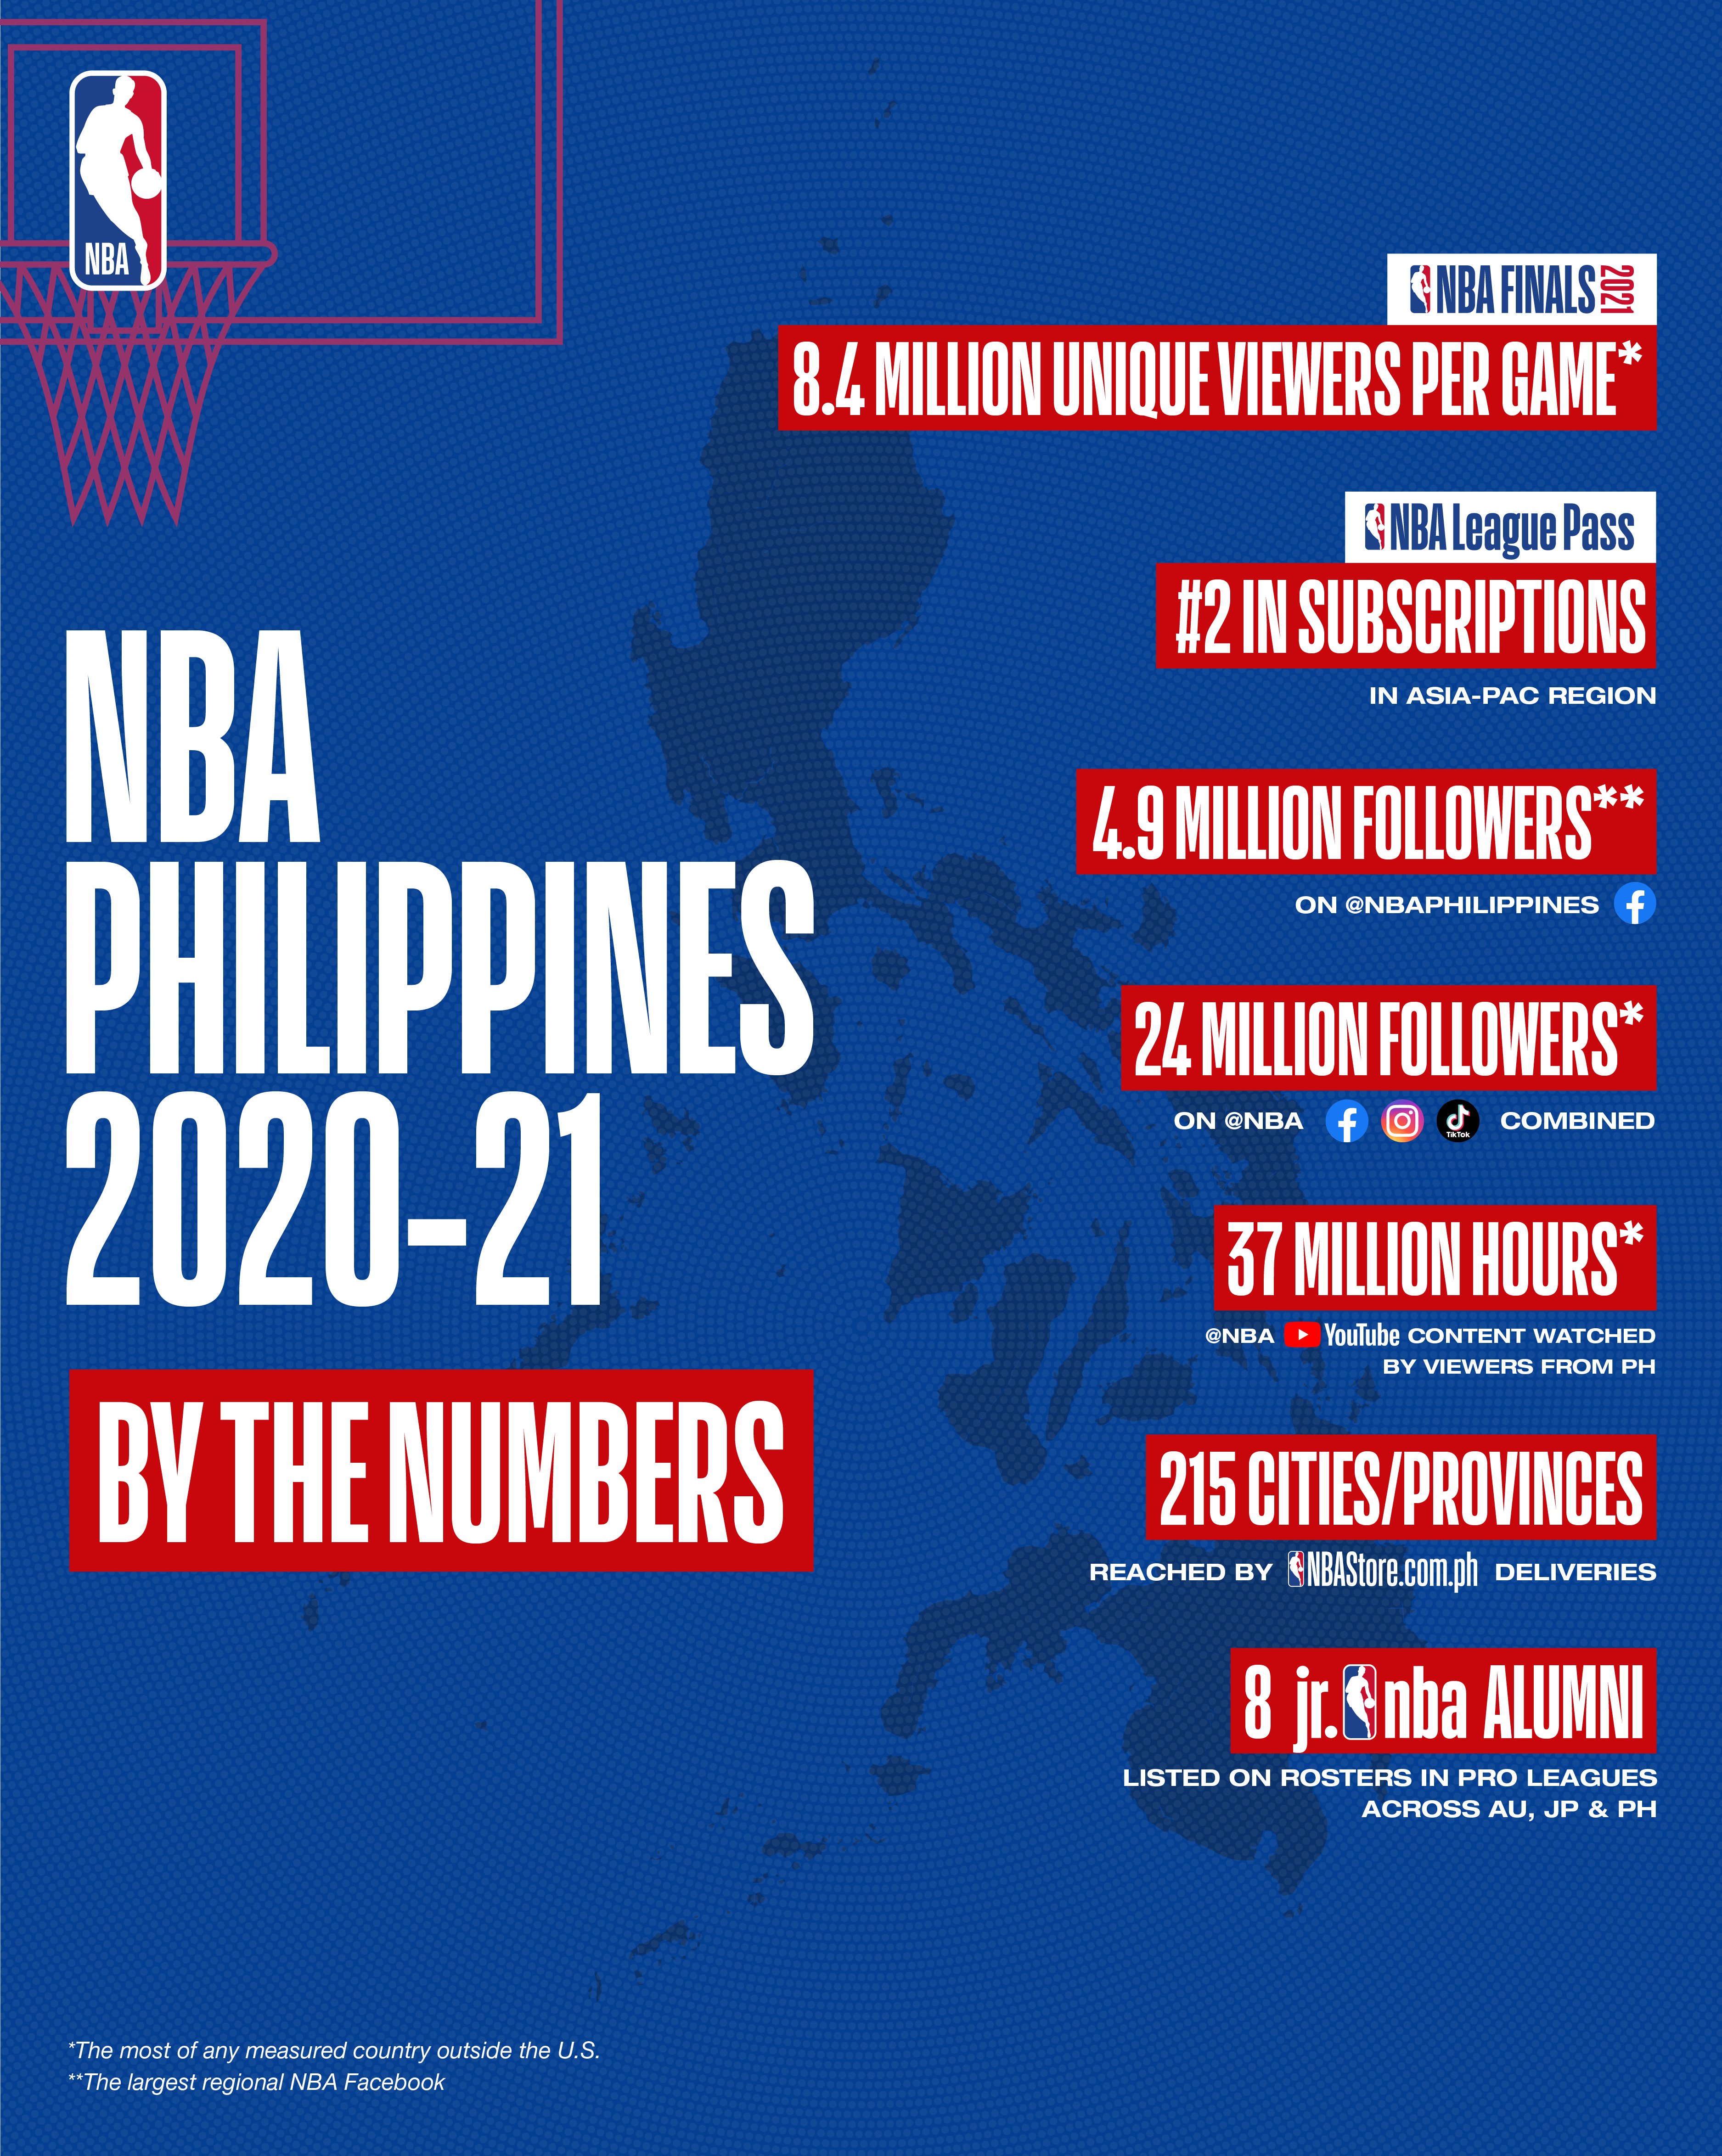 NBA Philippines by the numbers. 